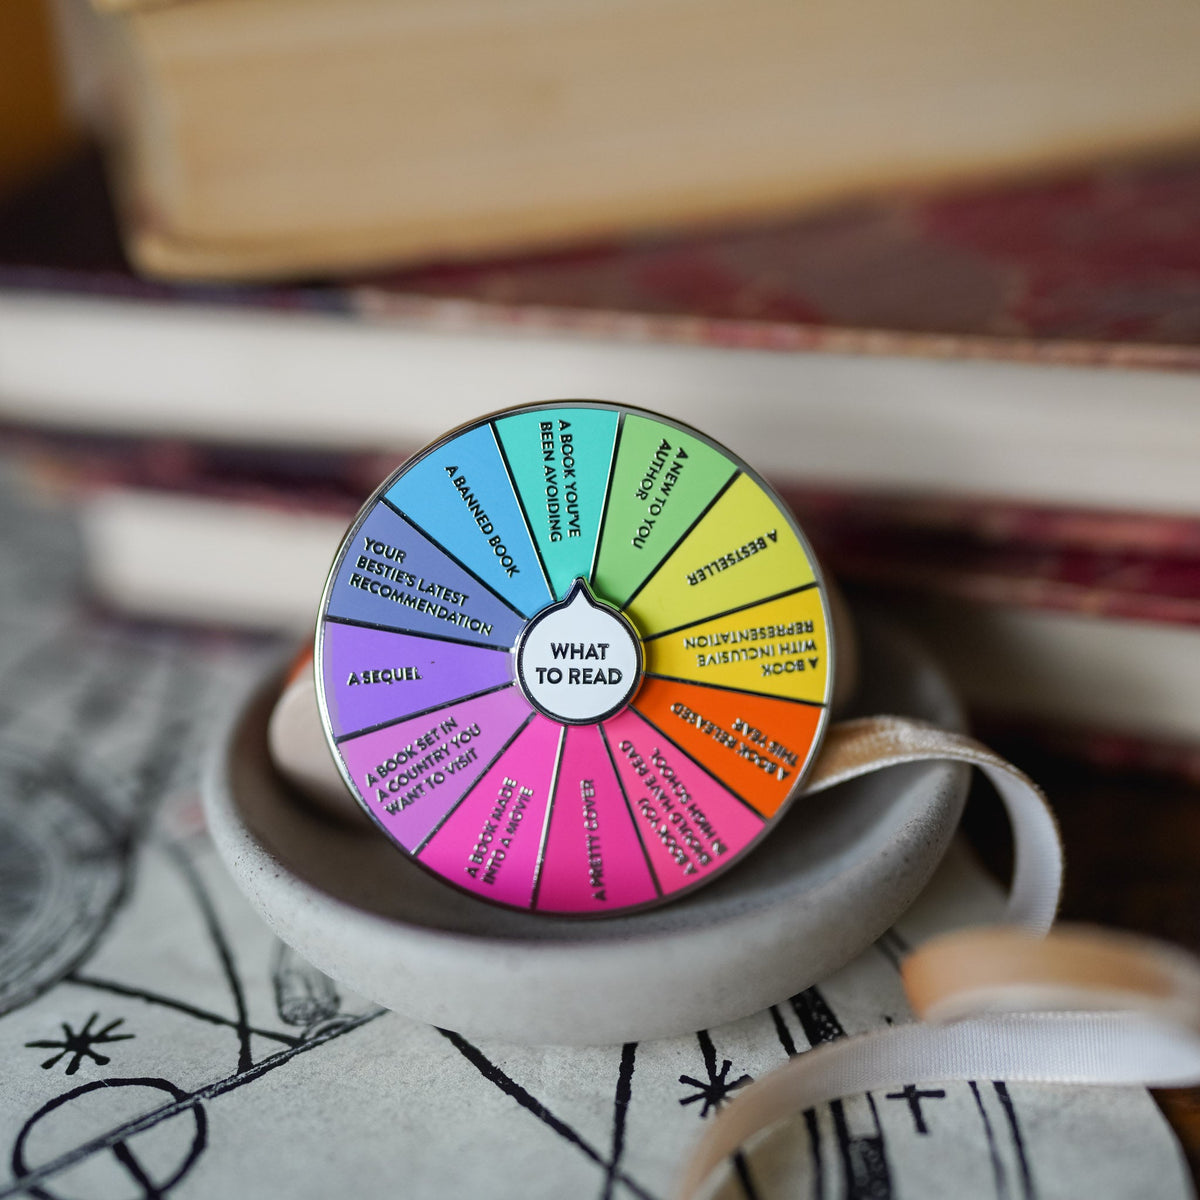 What To Read Spinner Enamel Pin with colored labels listing various book choices.